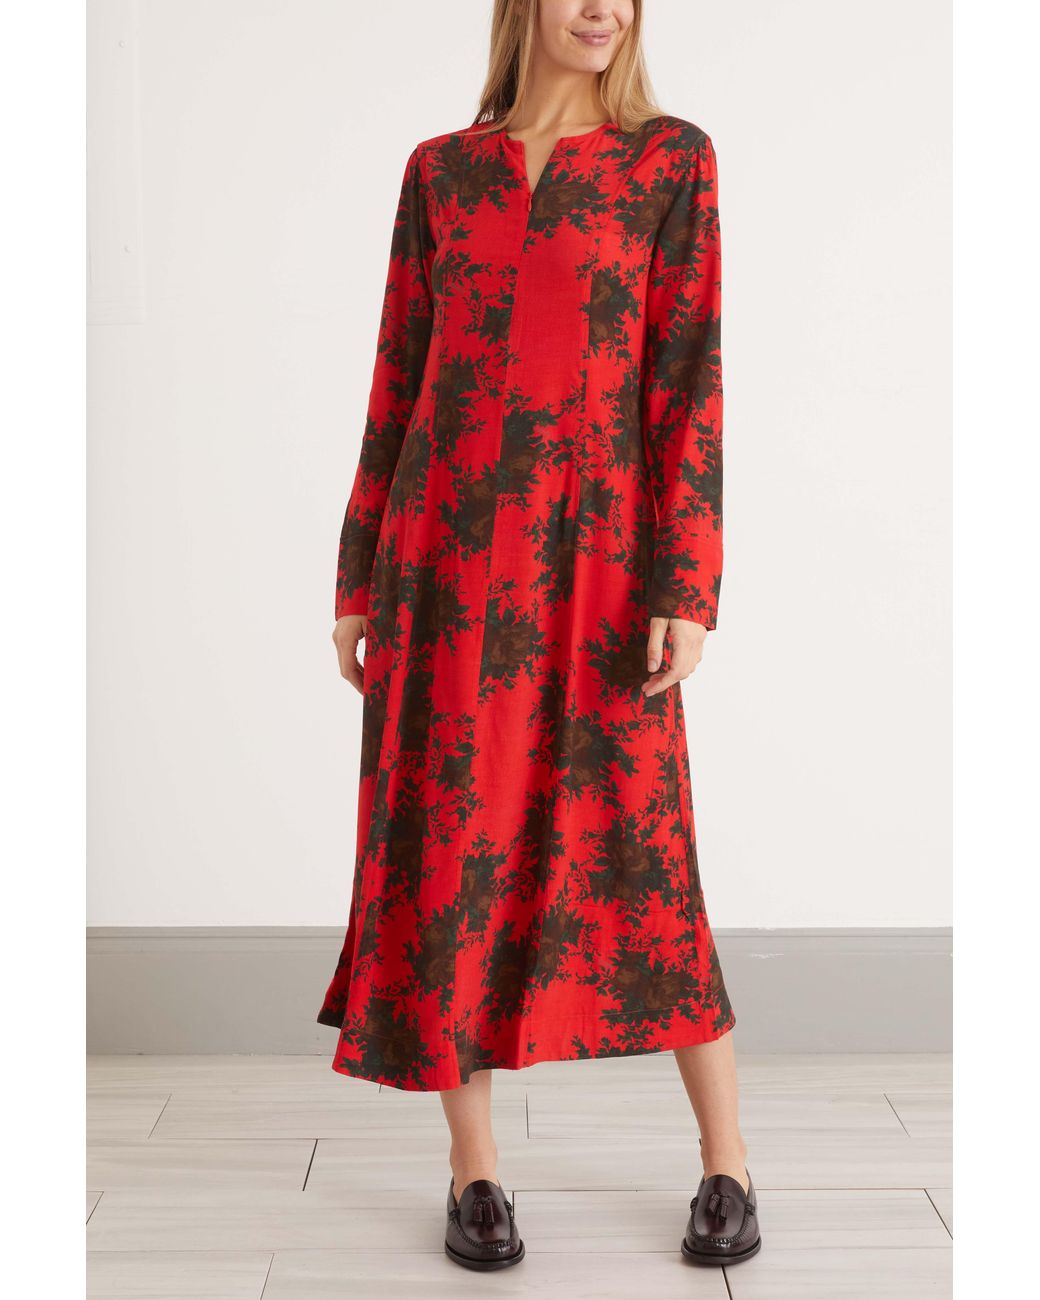 Ganni Printed Crepe Maxi Dress in Red | Lyst